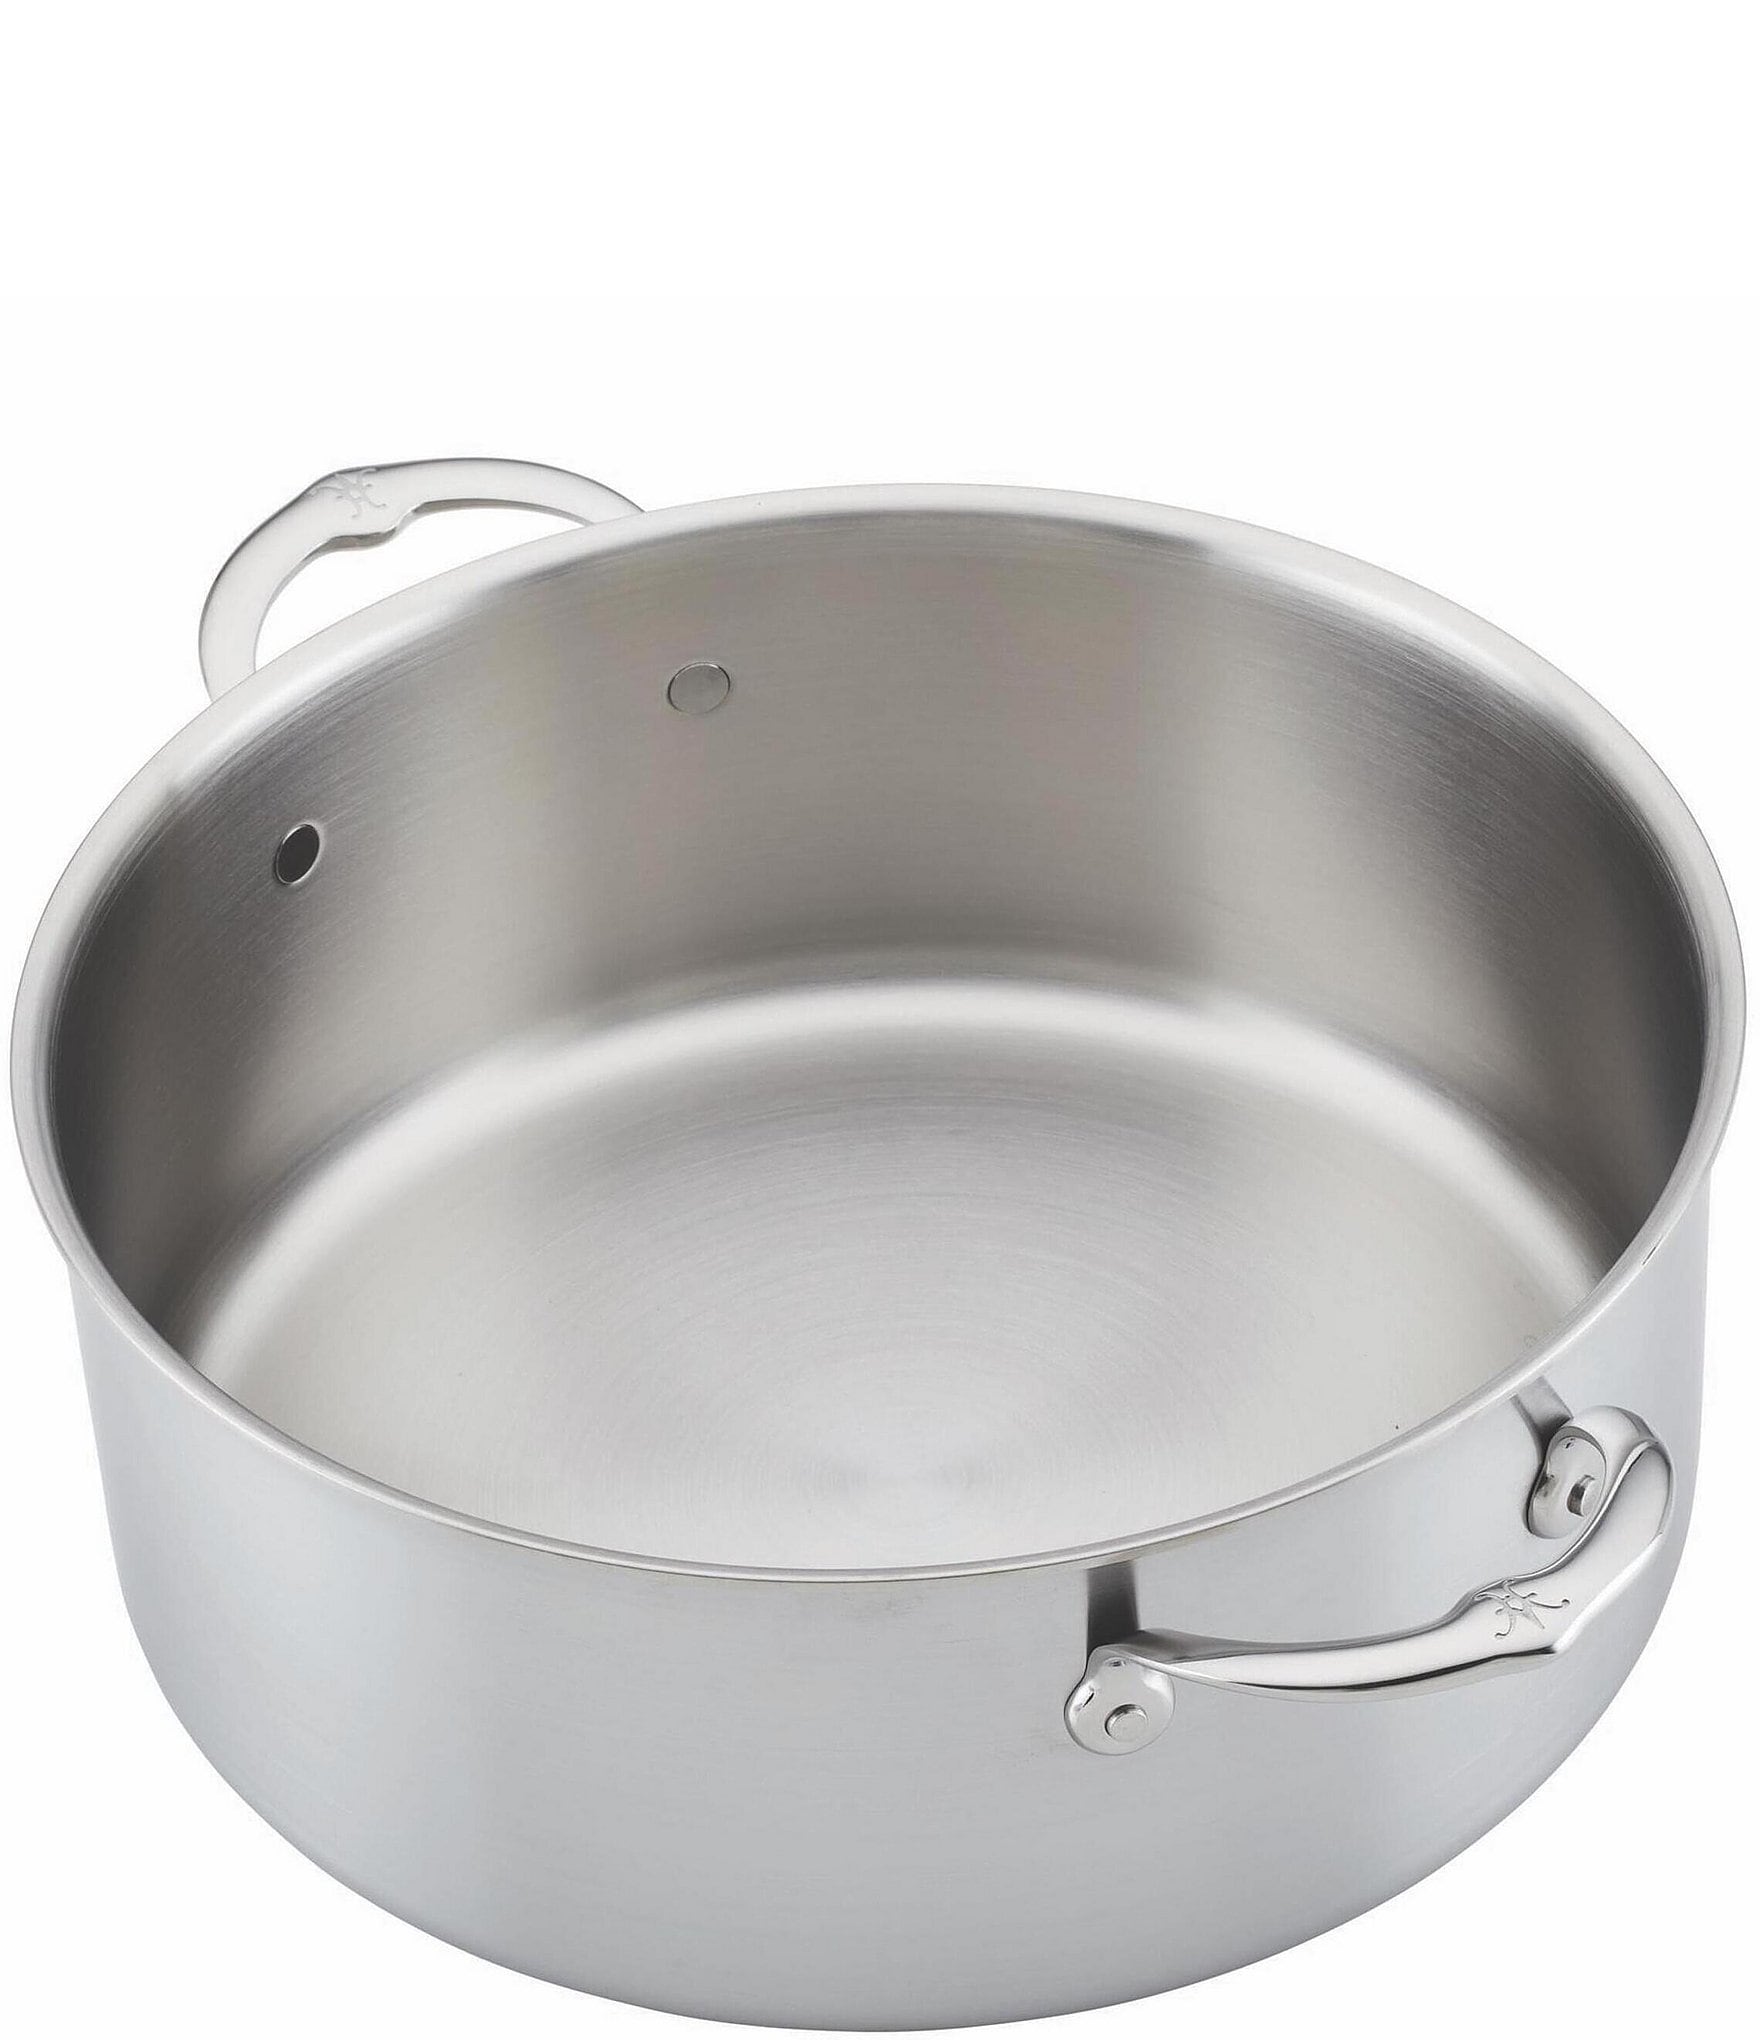 Thomas Keller Insignia Commercial Clad Stainless Steel TITUM